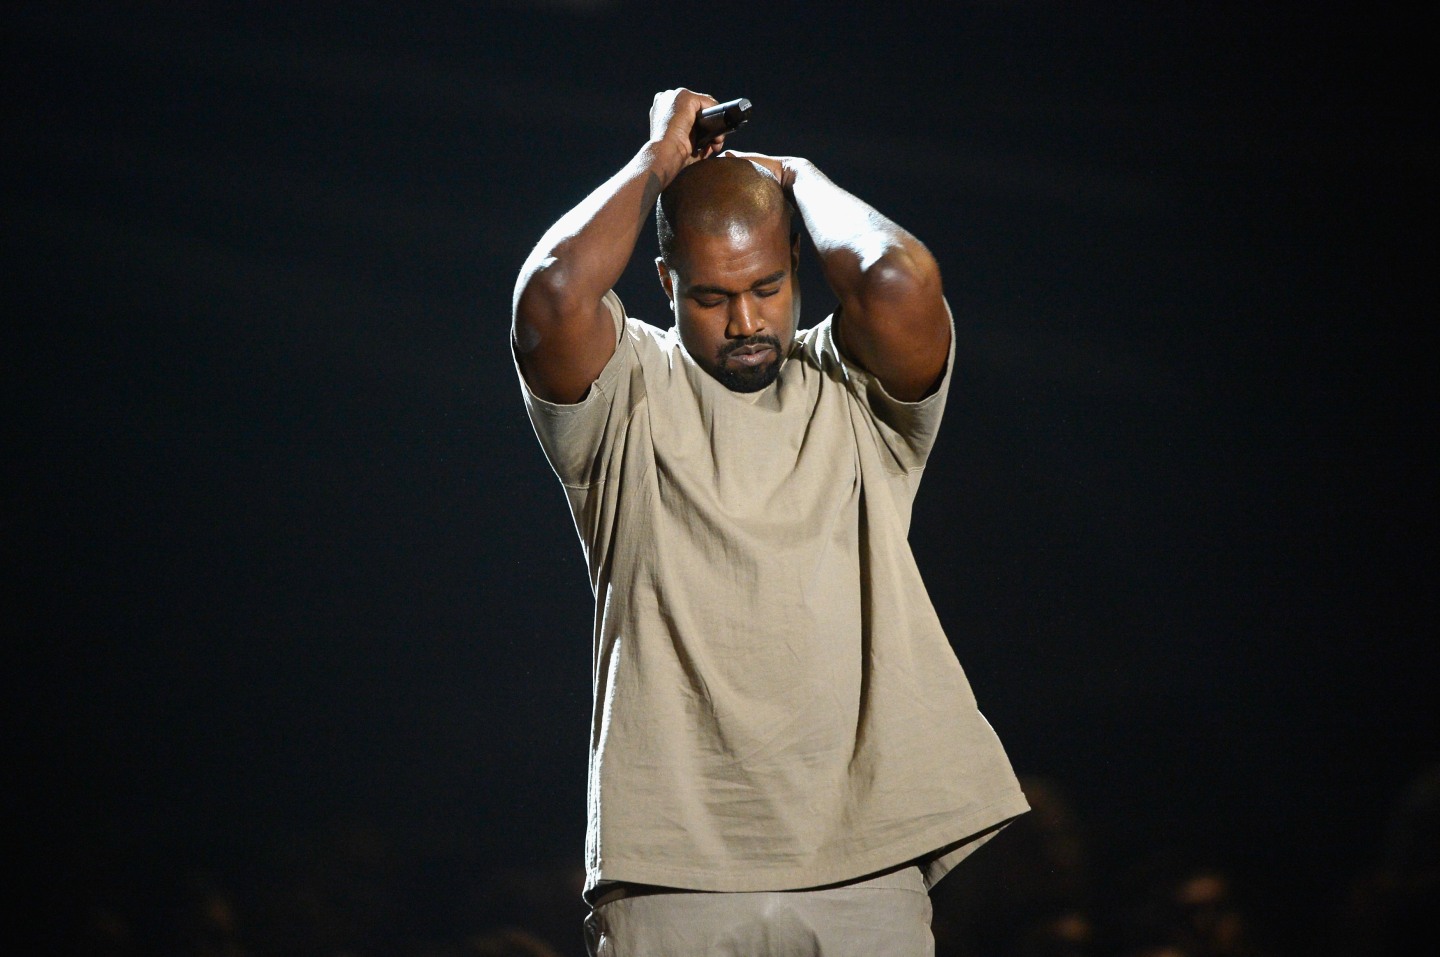 The latest round of Kanye West interviews has been a disaster